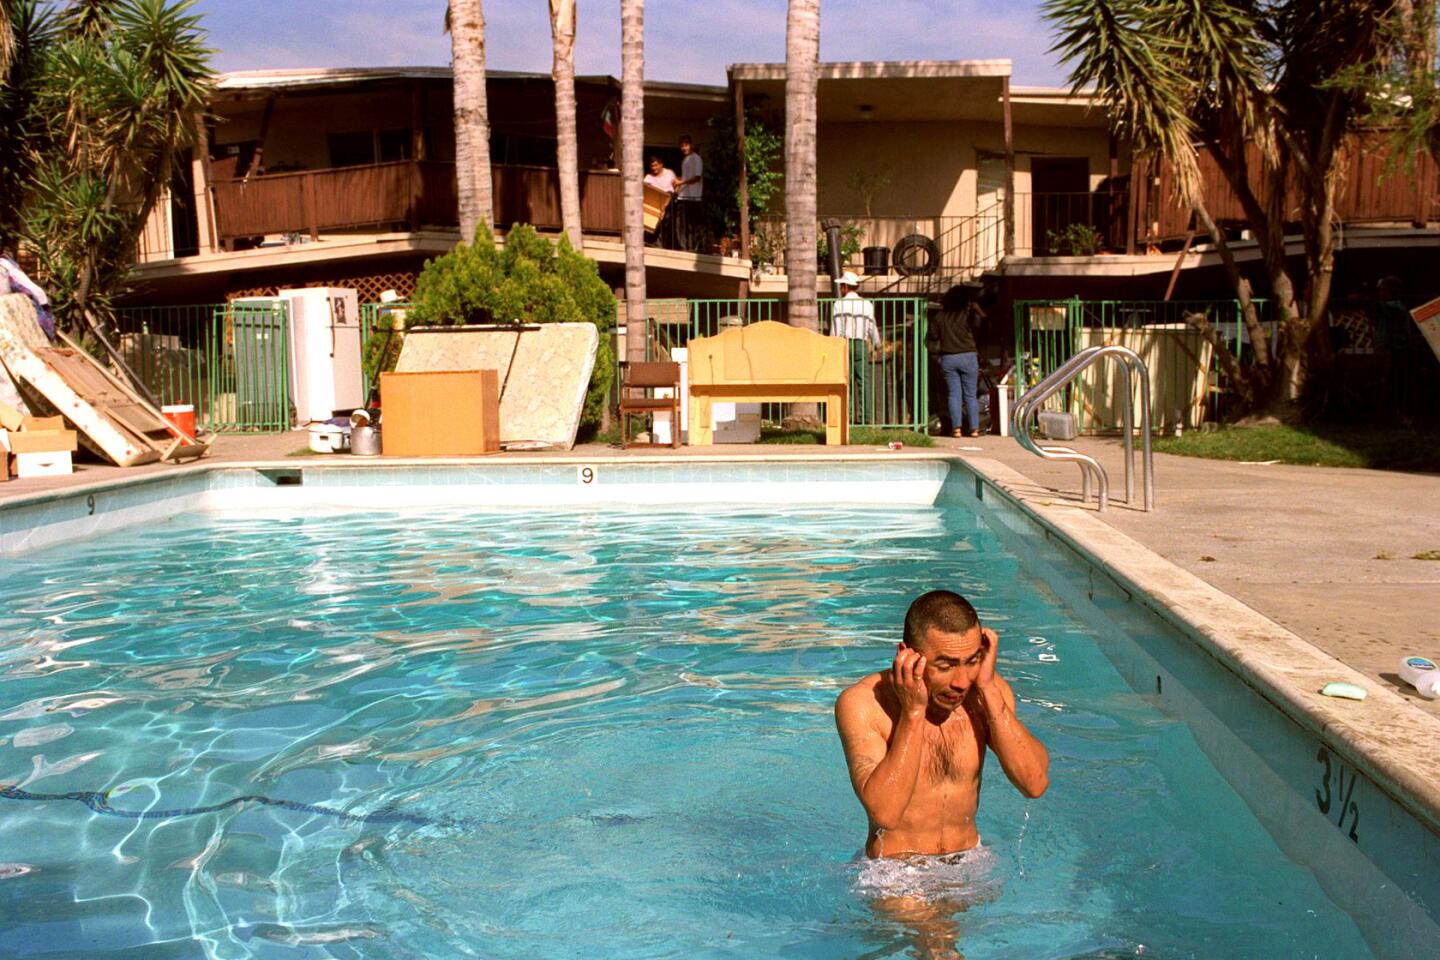 Unable to bathe since his Canoga Park apartment was condemned, Jose Aguilar rinses off in a pool.